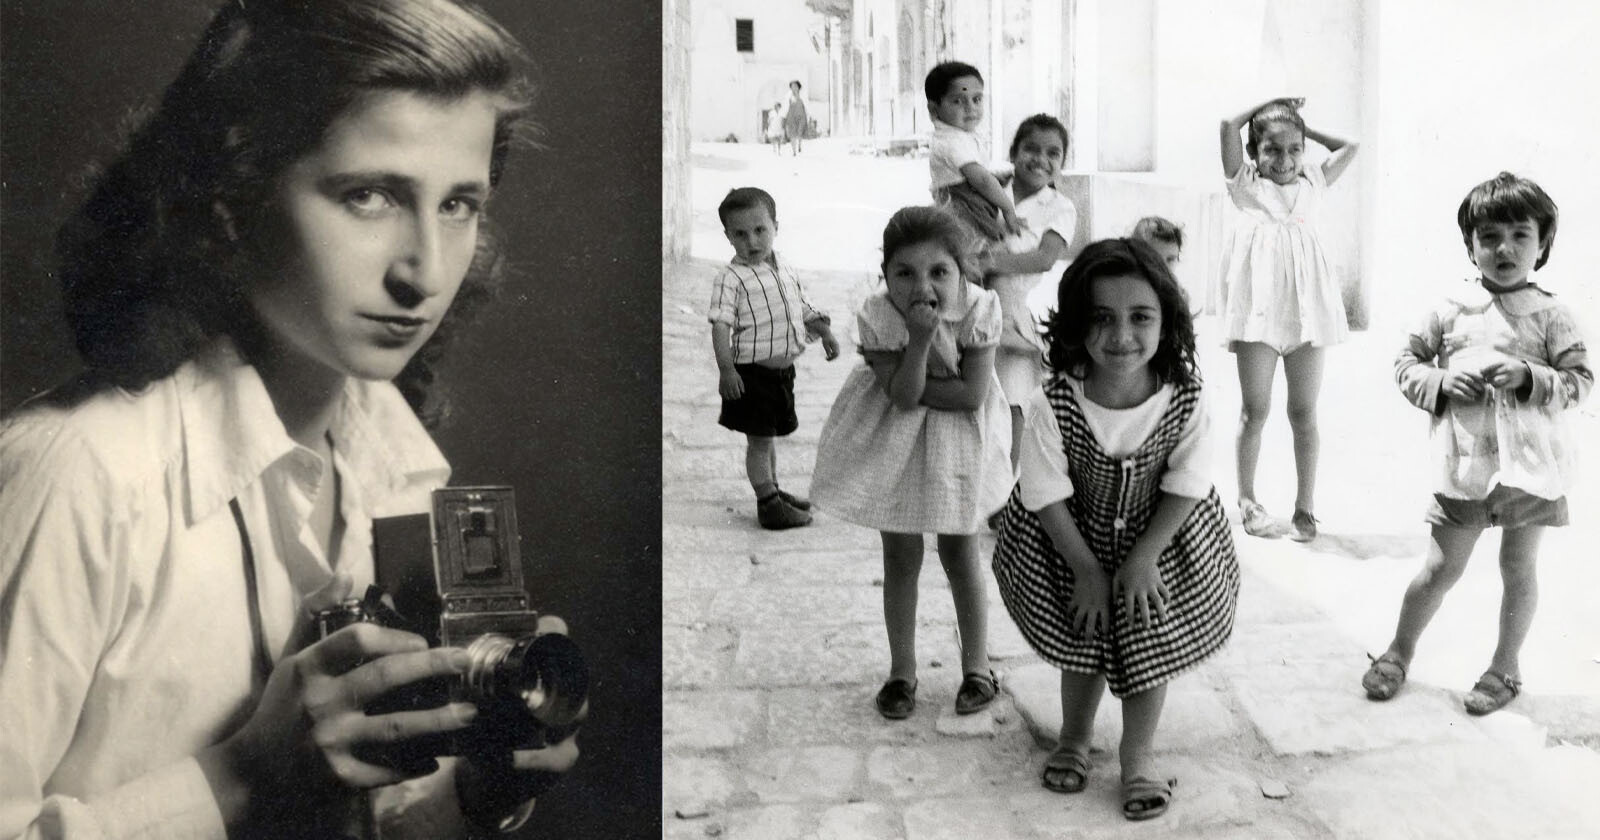  photographer who received first camera she fled 